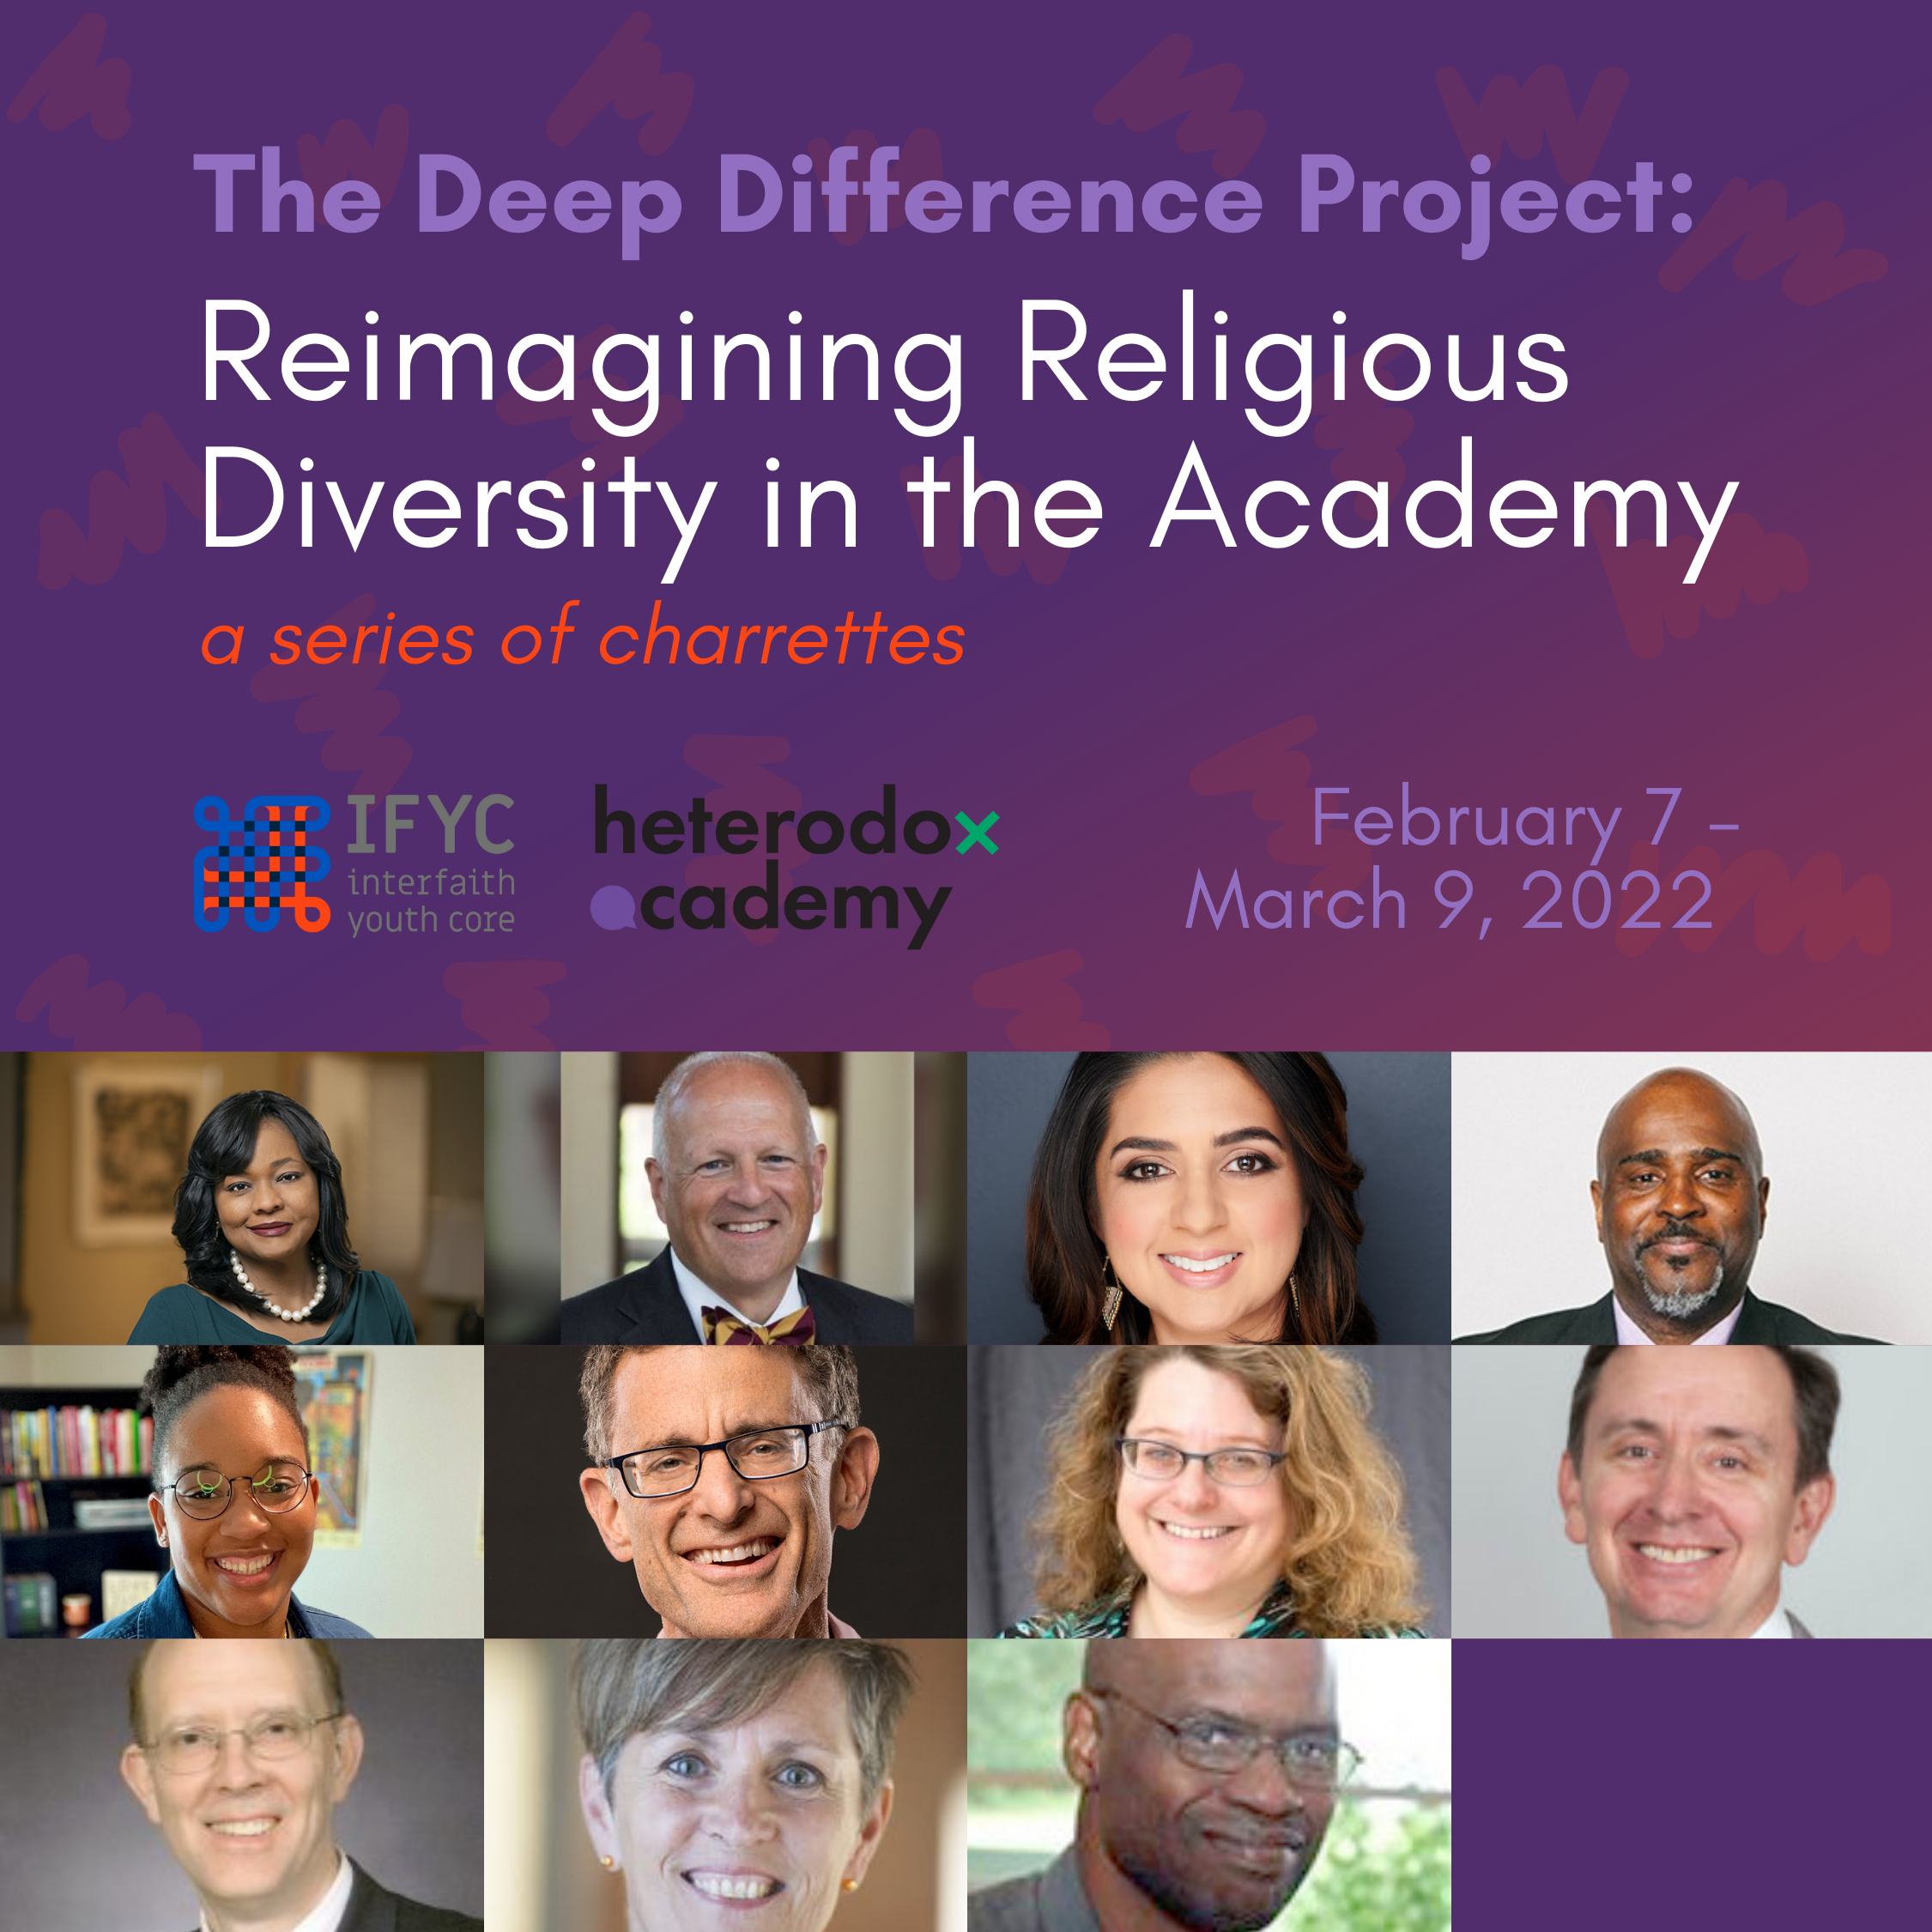 The Deep Difference Project: Reimagining Religious Diversity in the Academy